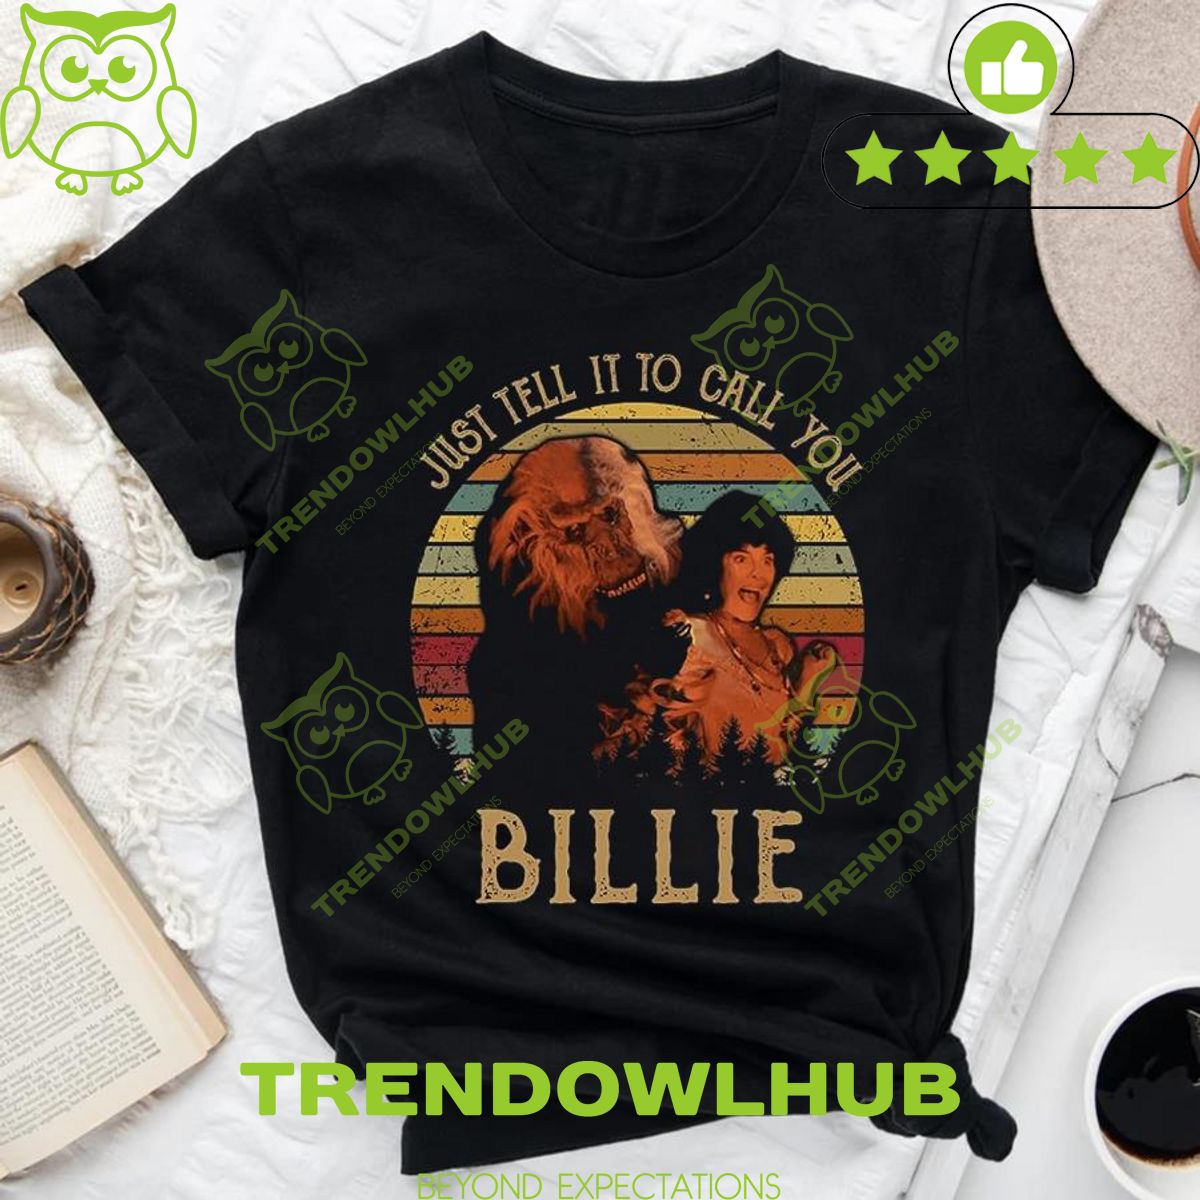 Creepshow Film Just tell it to call you billie vintage t shirt